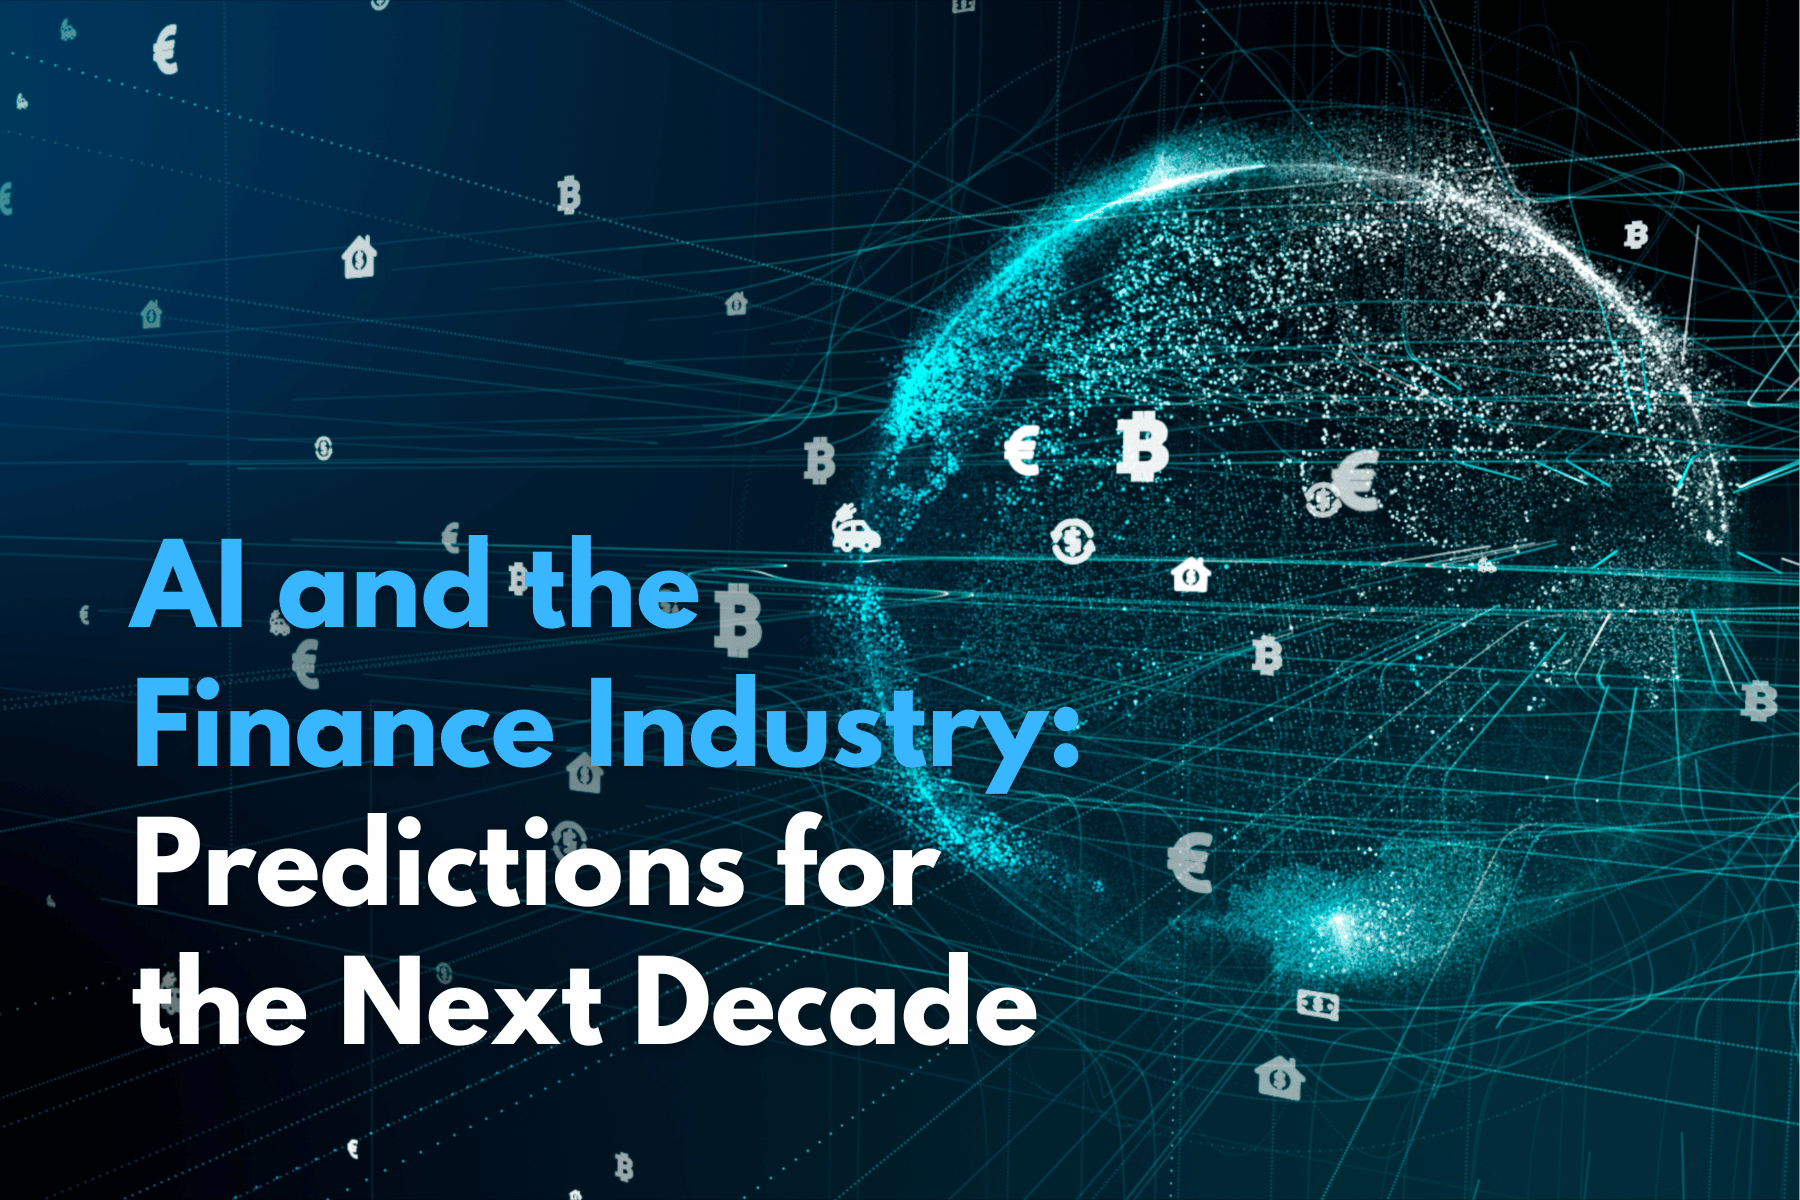 AI and the Finance Industry: Predictions for the Next Decade